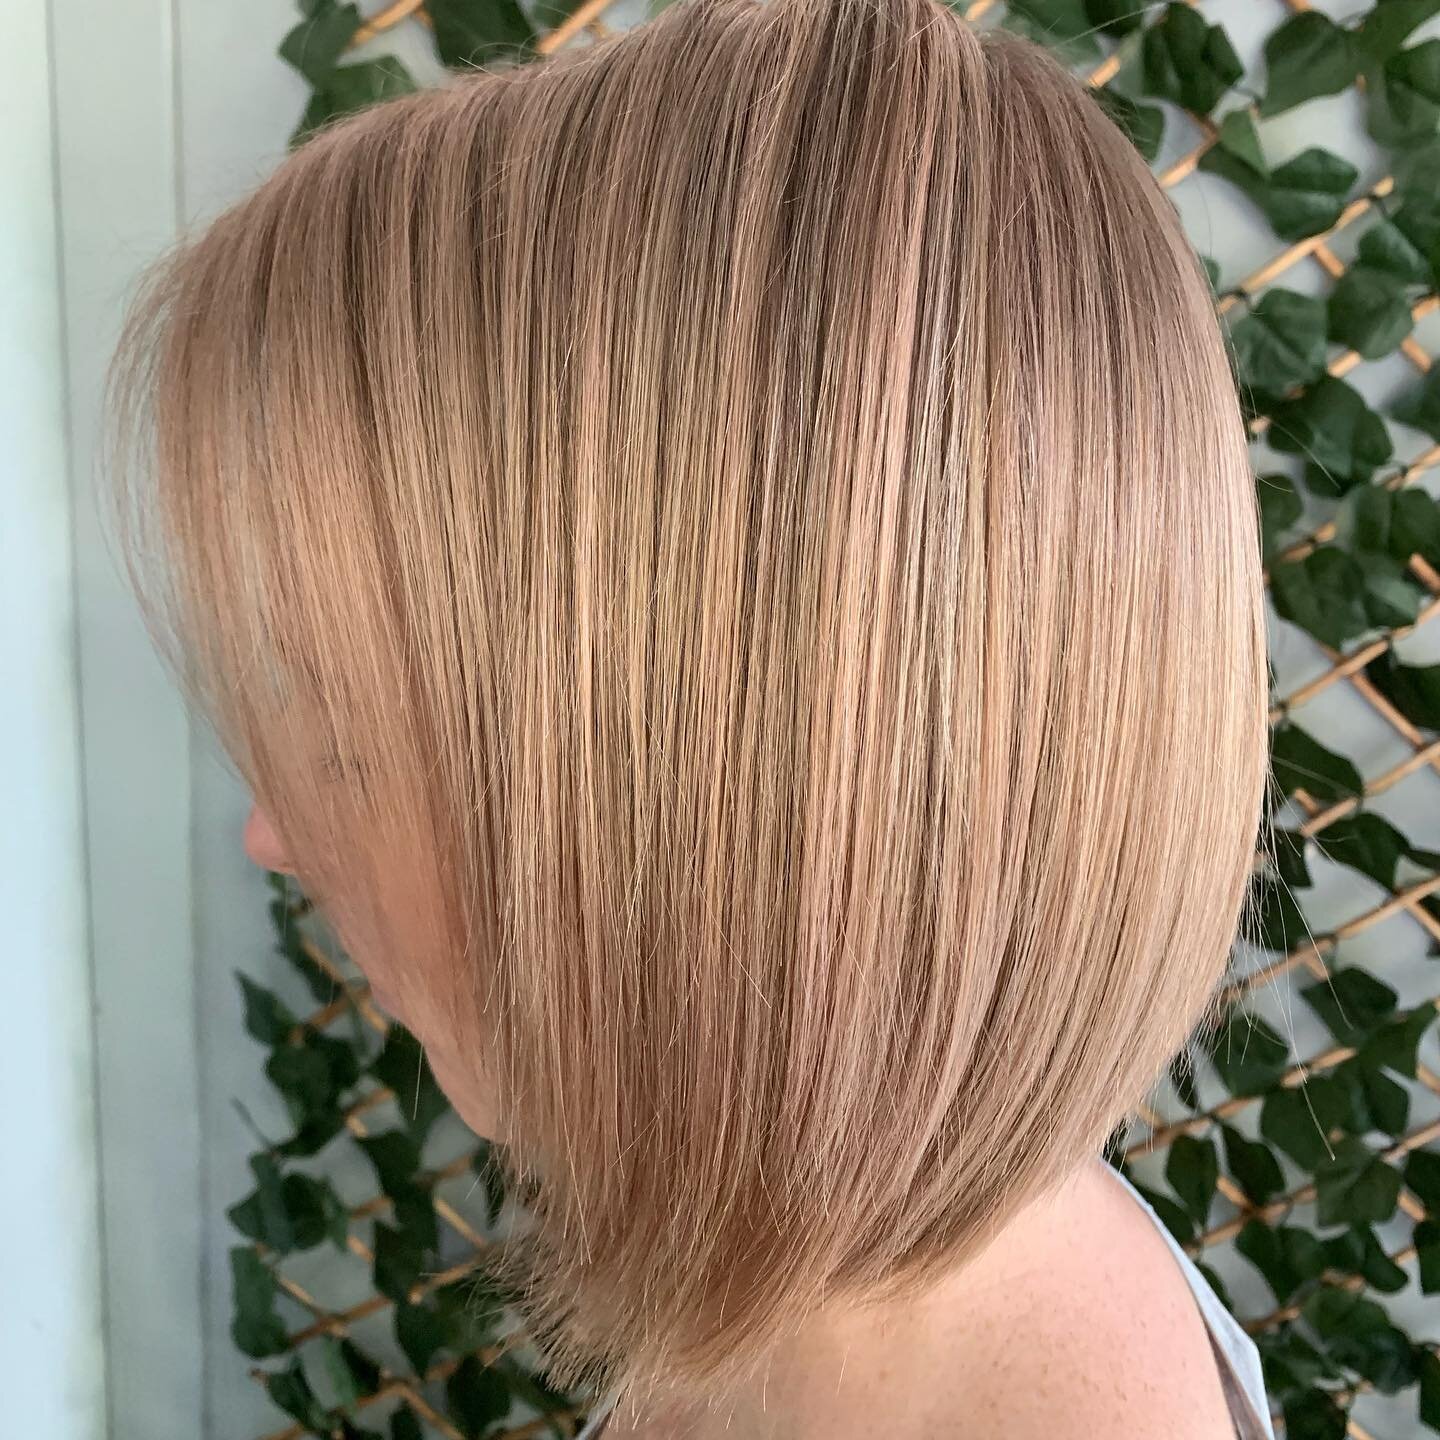 Cute blush bob!!! Popping a glaze of a soft pink over can make things a little exciting when you can&rsquo;t go all out 🌸

Service time 2.5 hrs
Full head of foils
#rootshadow
Double toner
#olaplex
Haircut+Blowdry